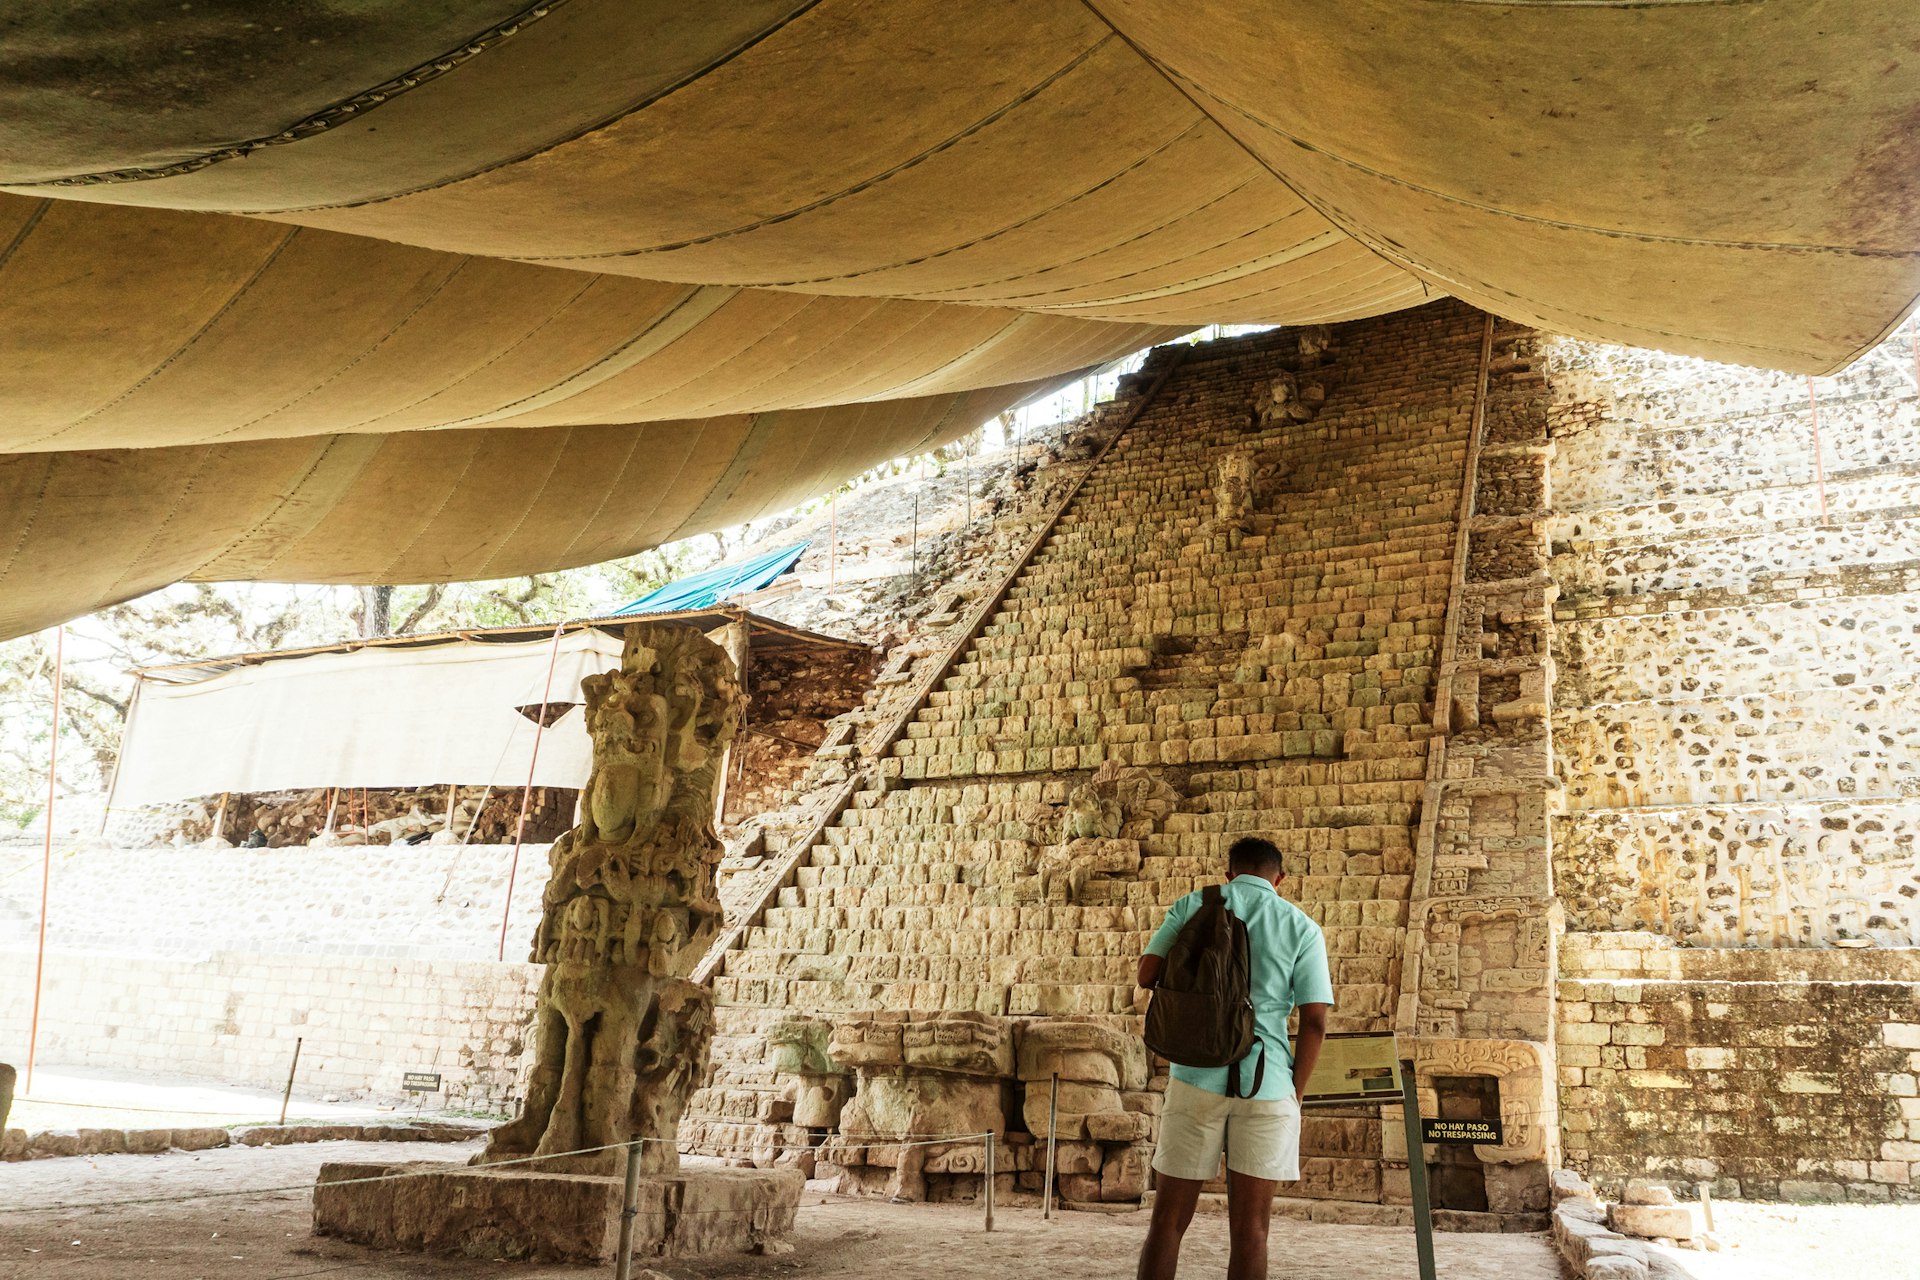 Man visiting the Maya pyramids and temples in the archaeological park of Copán Ruinas, Honduras